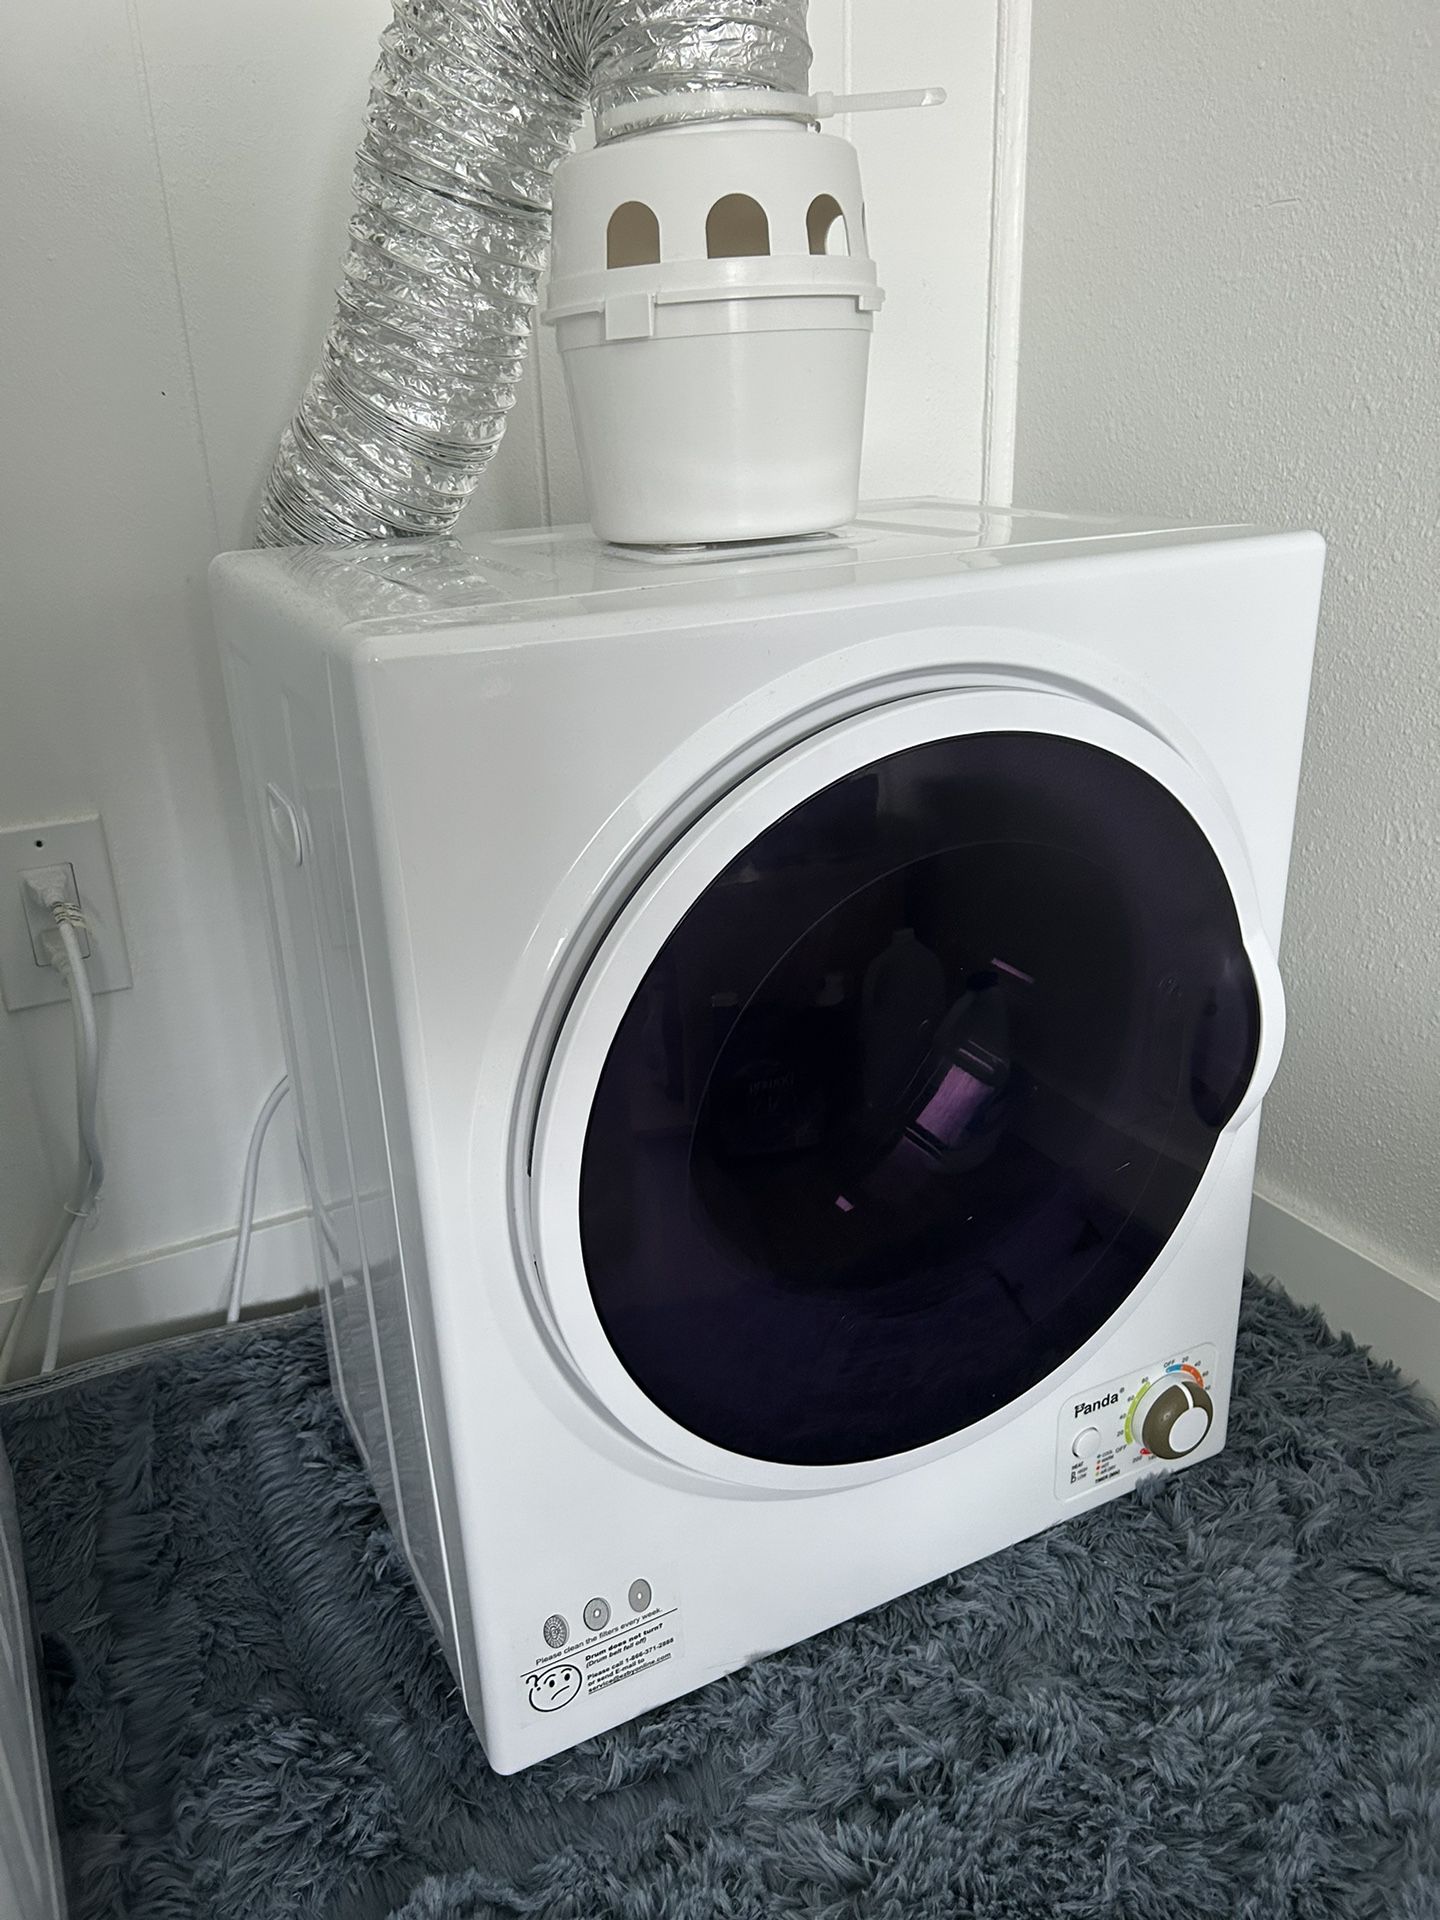 Panda portable dryer for Sale in College Station, TX - OfferUp